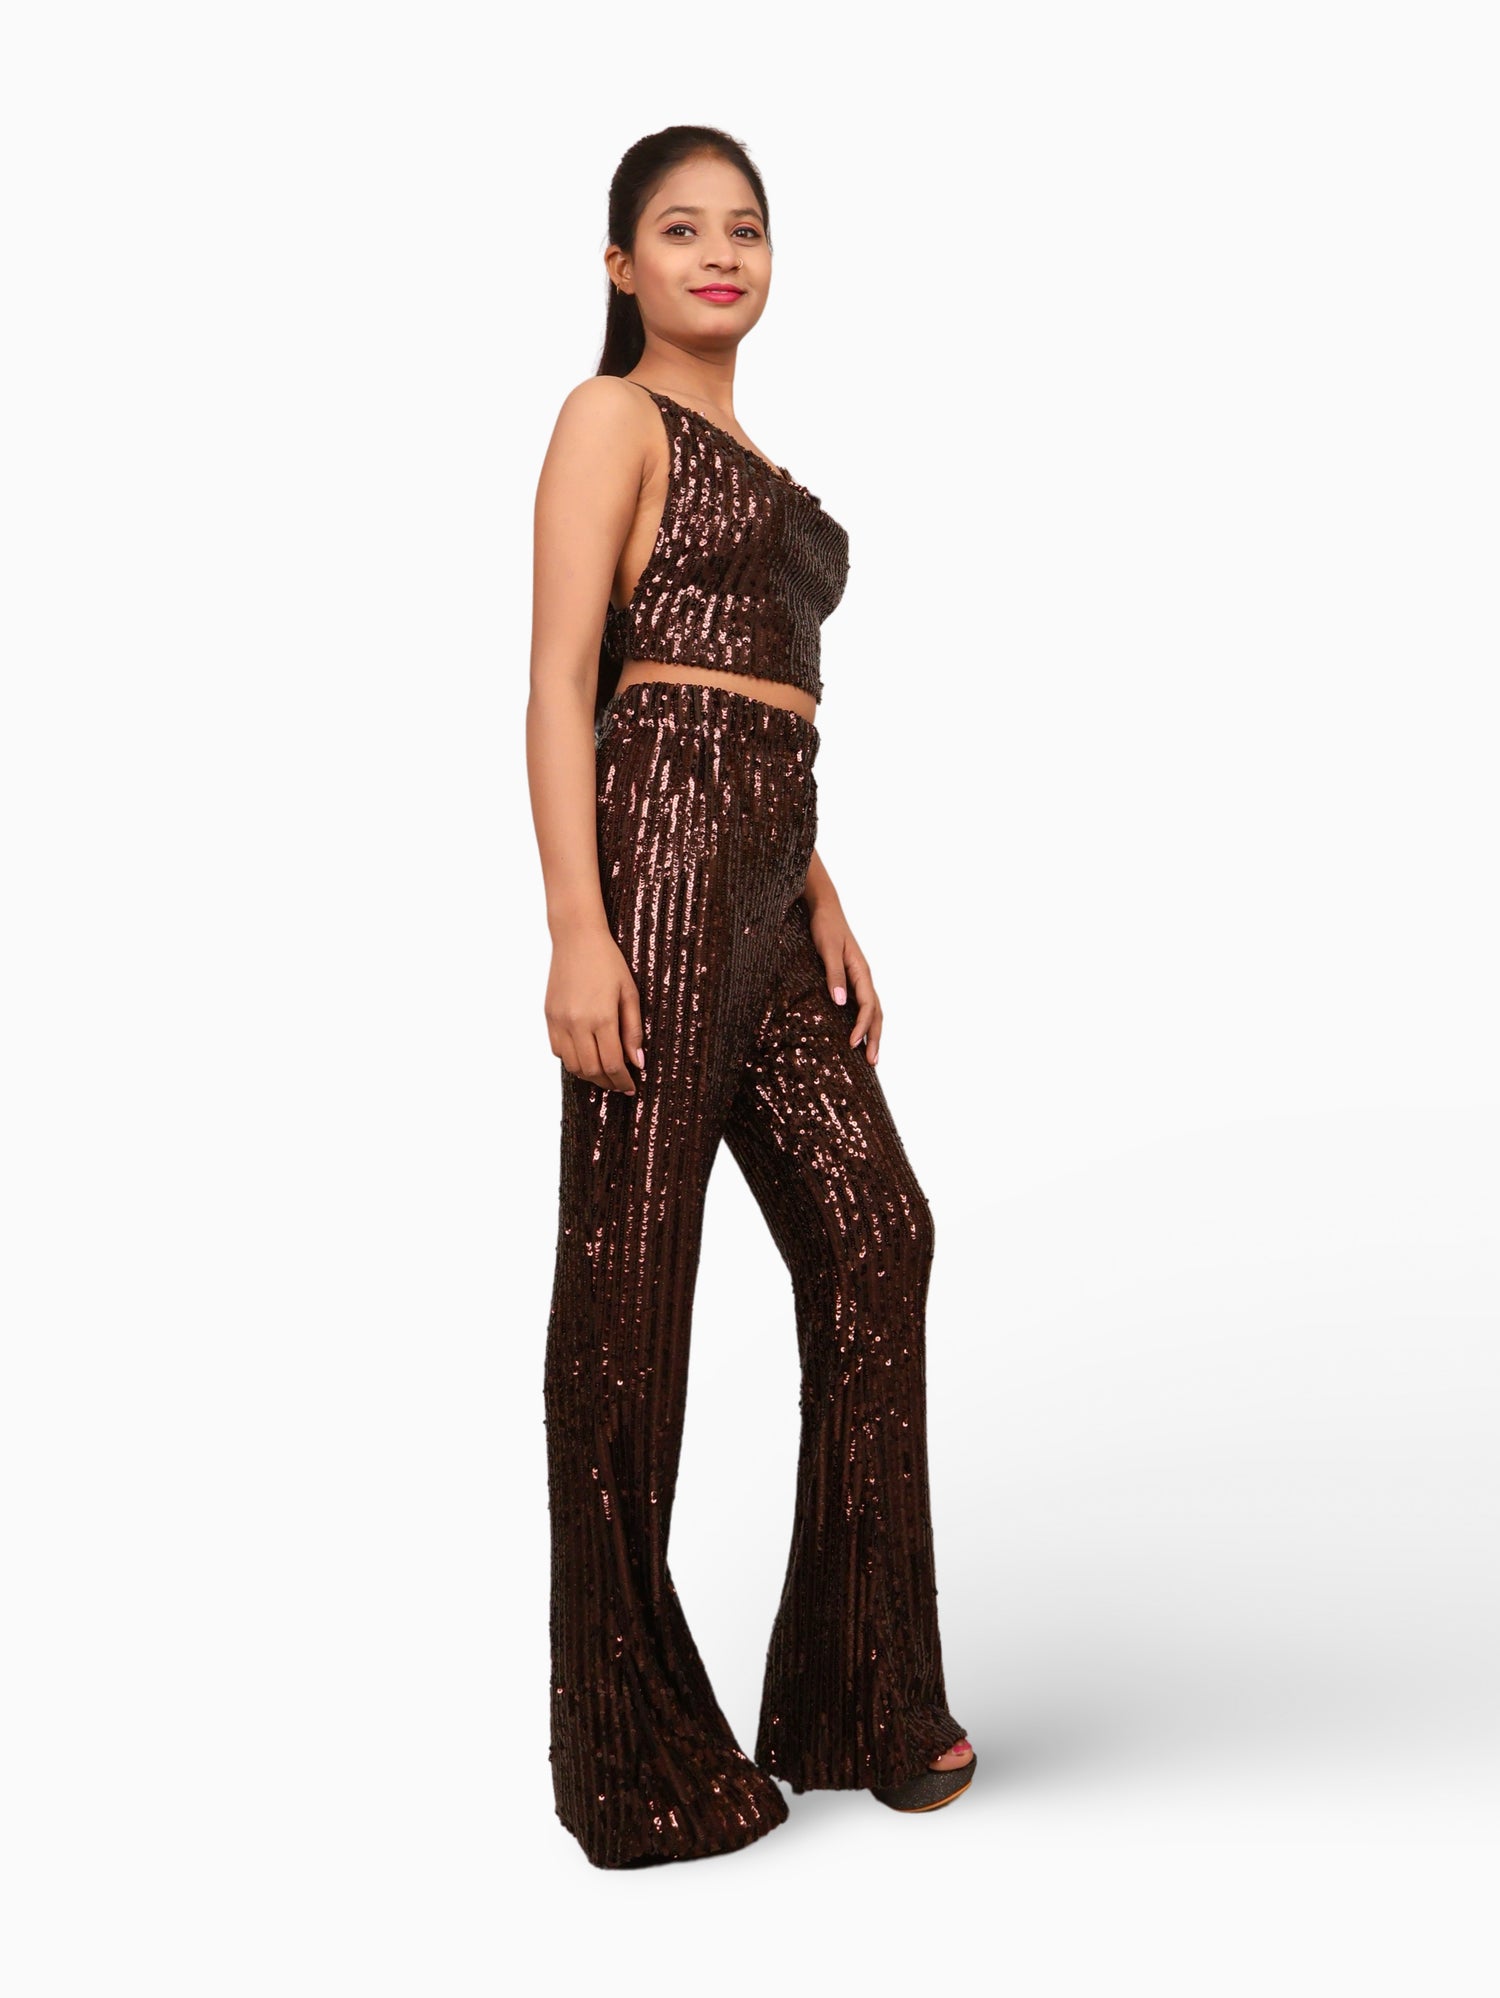 Sequins Spaghetti Neck Co-Ord Set by Shreekama Dark Brown Dress for Party Festival Wedding Occasion in Noida